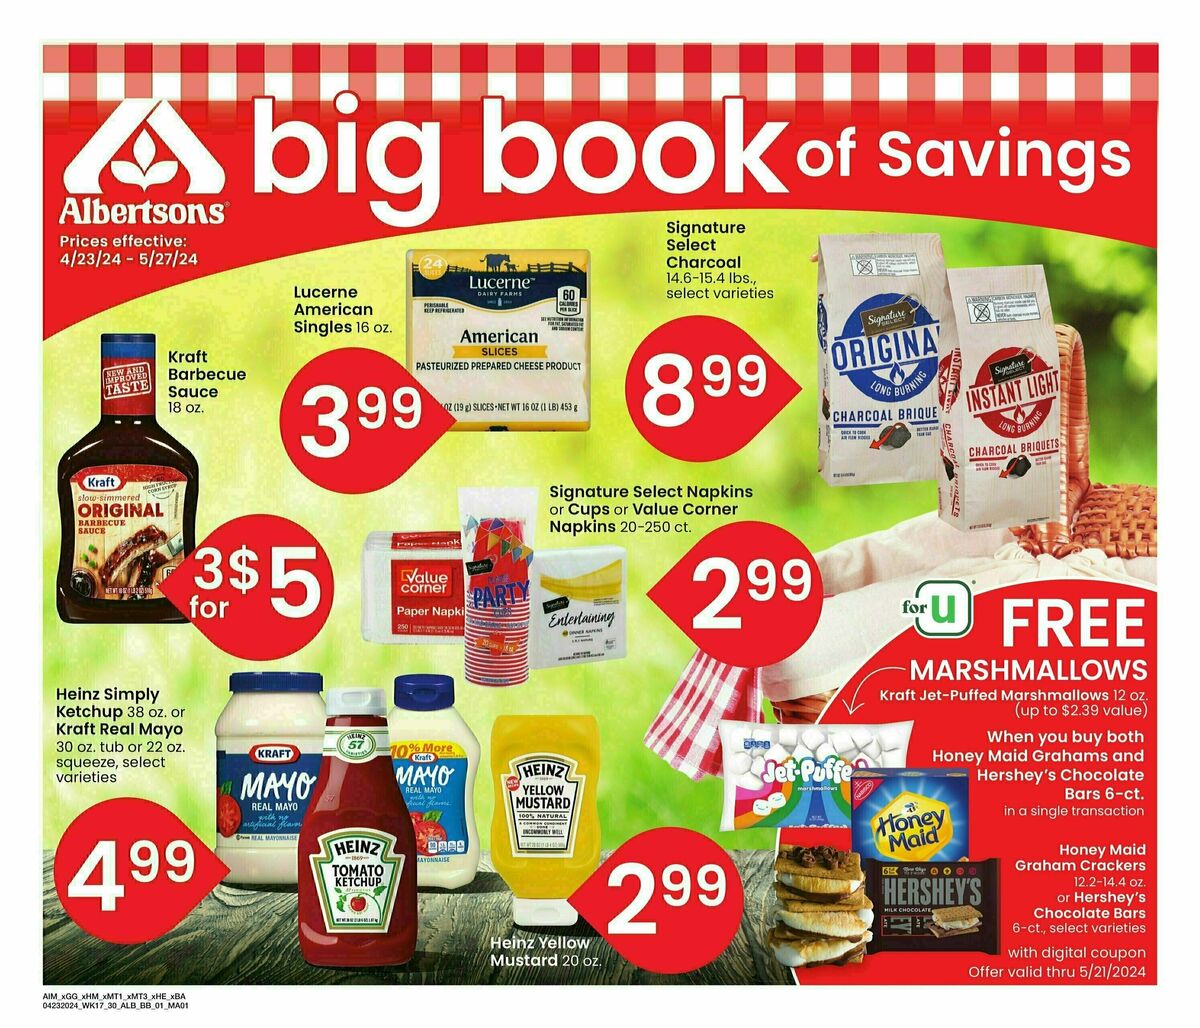 Albertsons Big Book of Savings Weekly Ad from April 23